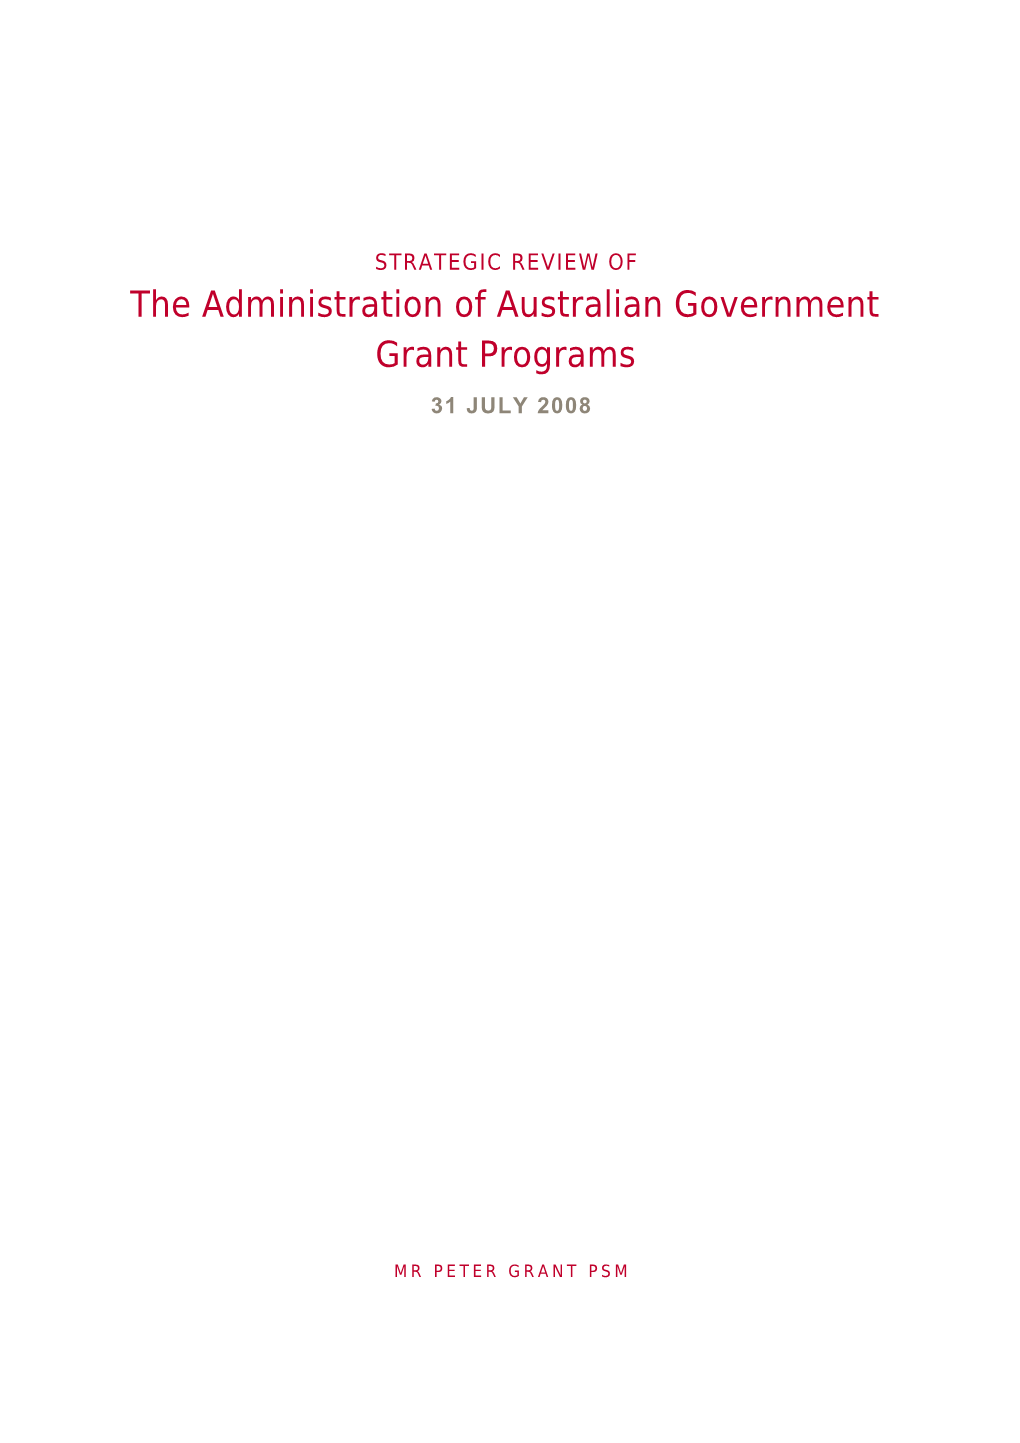 Strategic Review of the Administration of Australian Government Grants Program